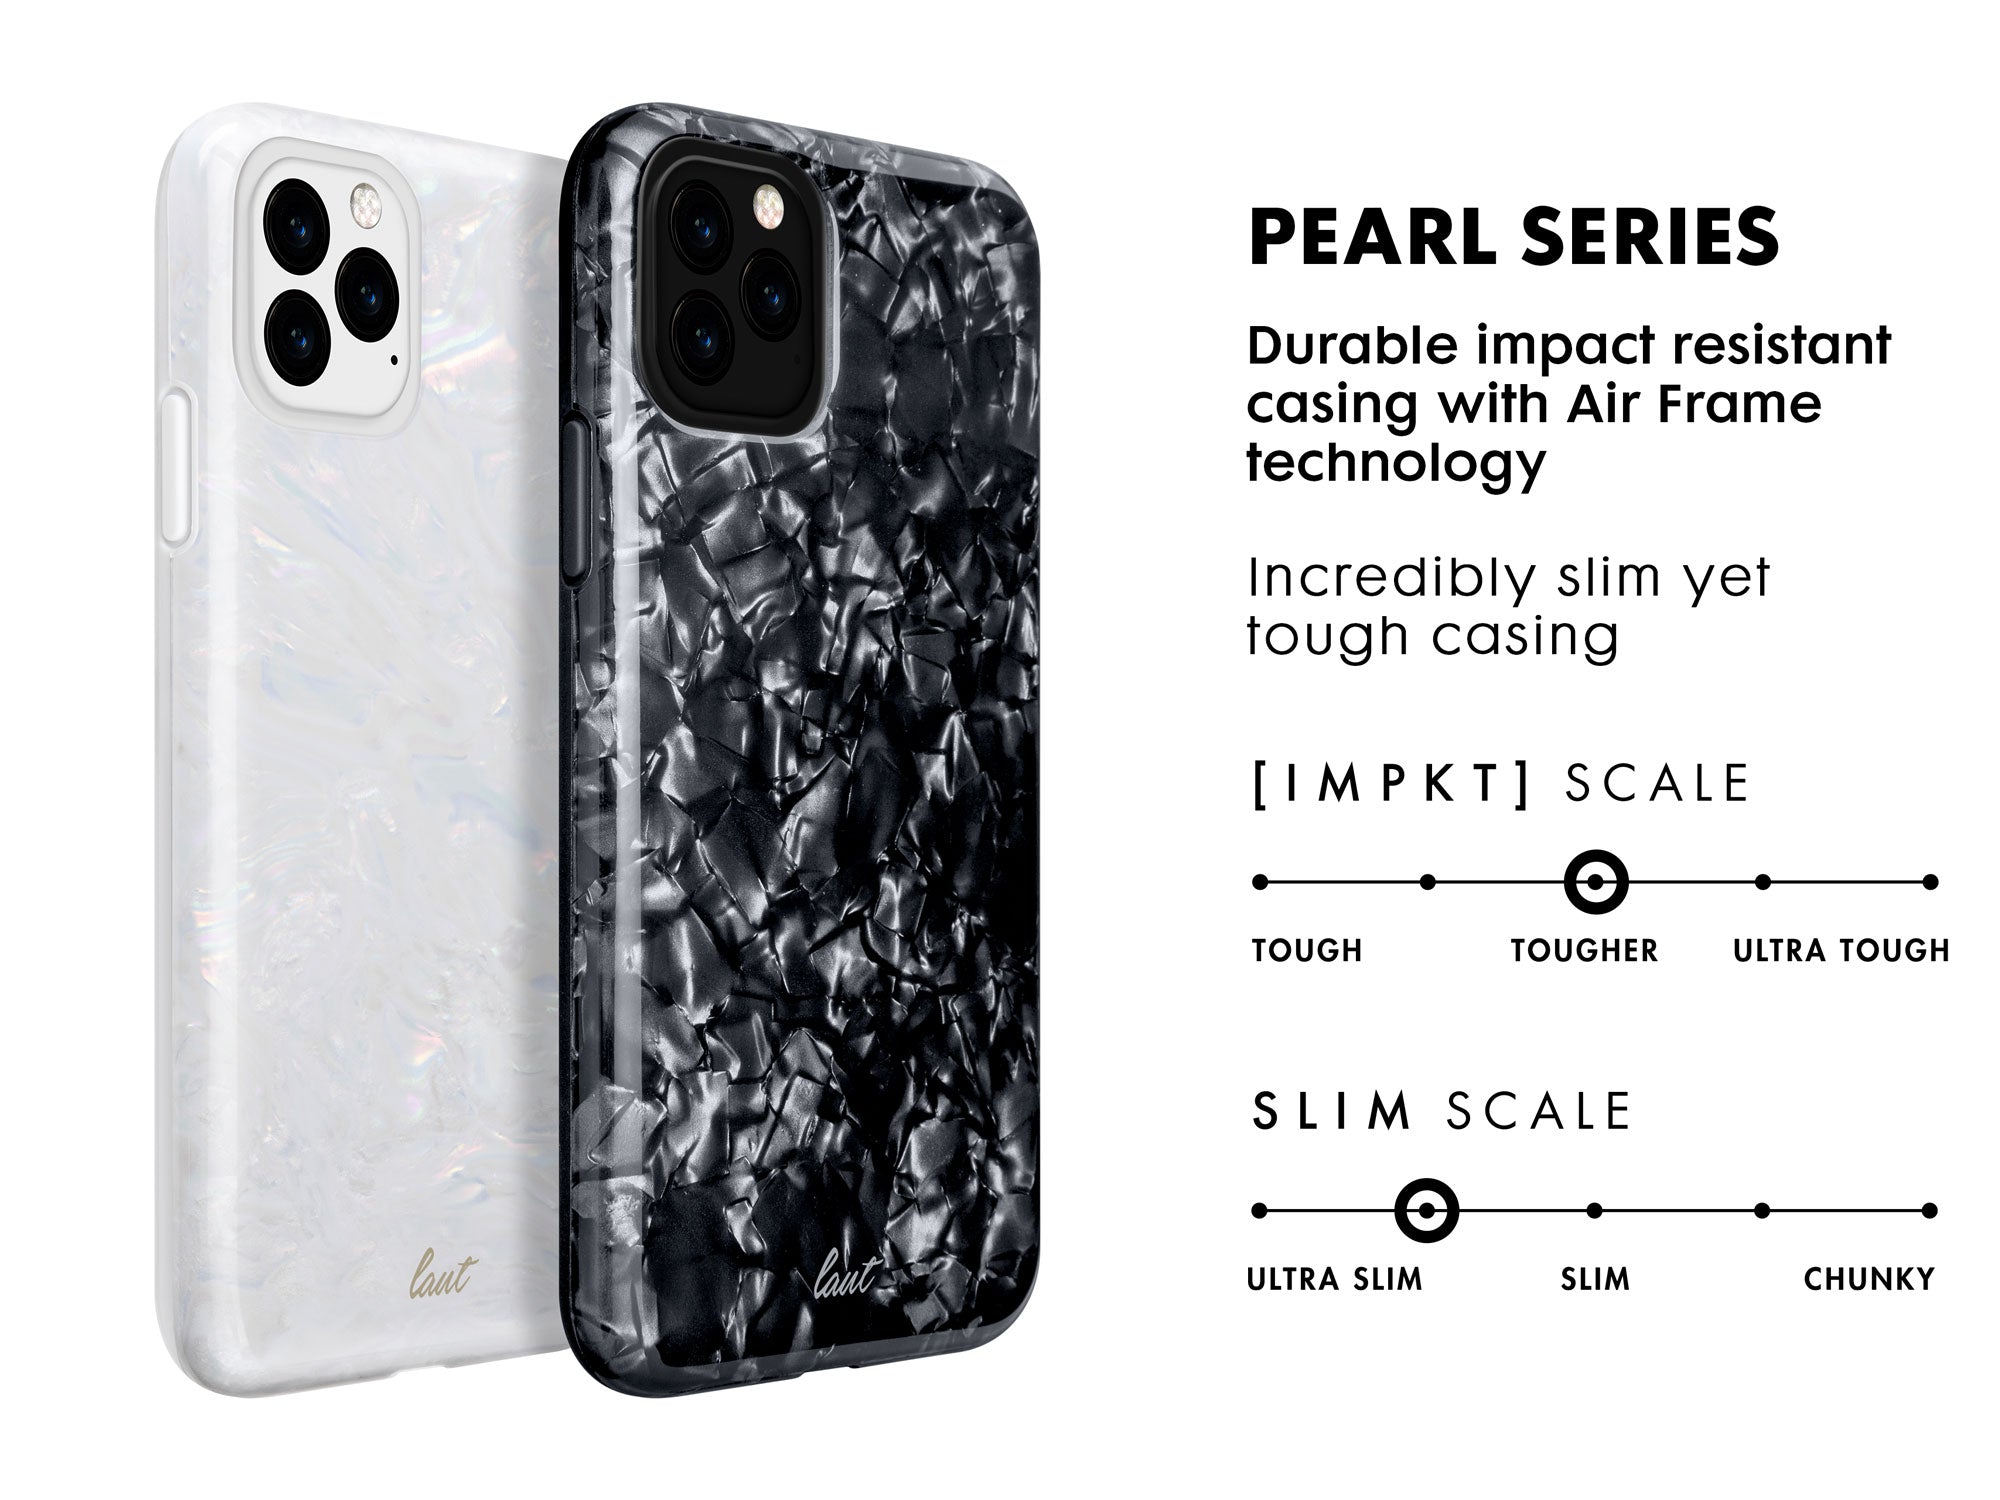 PEARL for iPhone 11 series